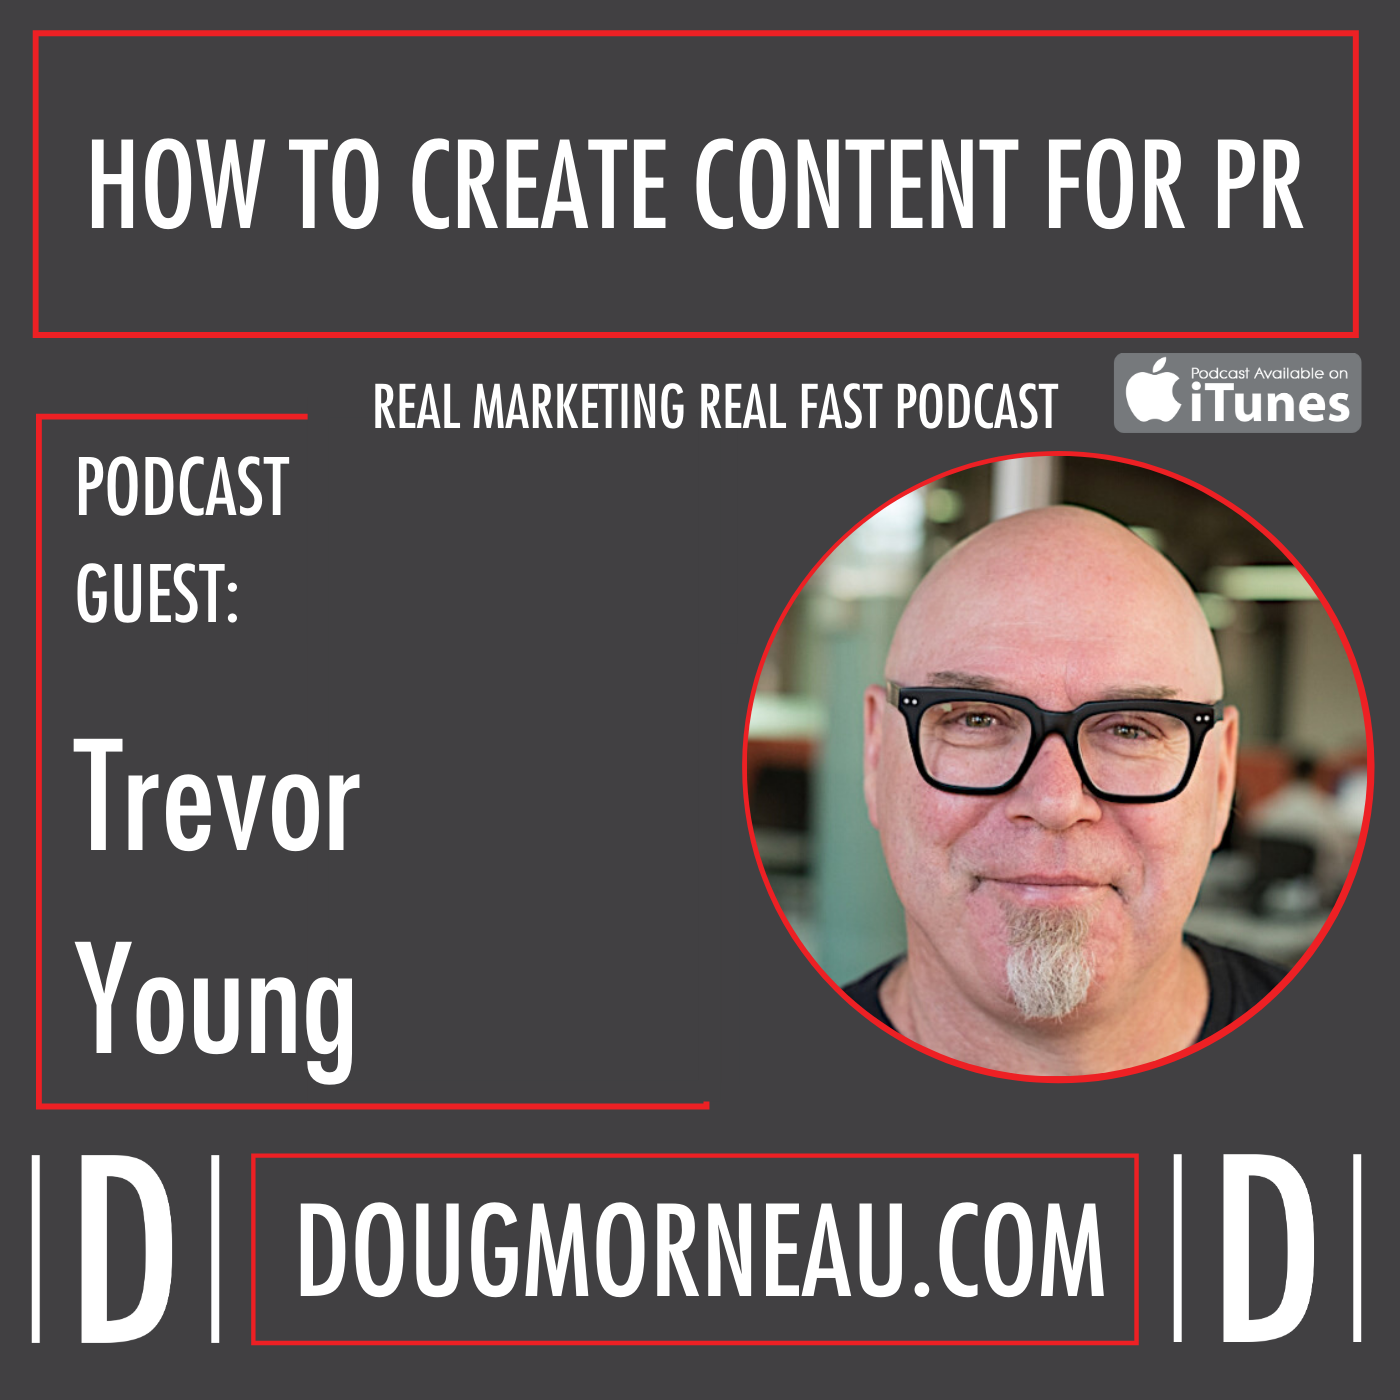 HOW TO CREATE CONTENT FOR PR – TREVOR YOUNG - DOUG MORNEAU - REAL MARKETING REAL FAST PODCAST